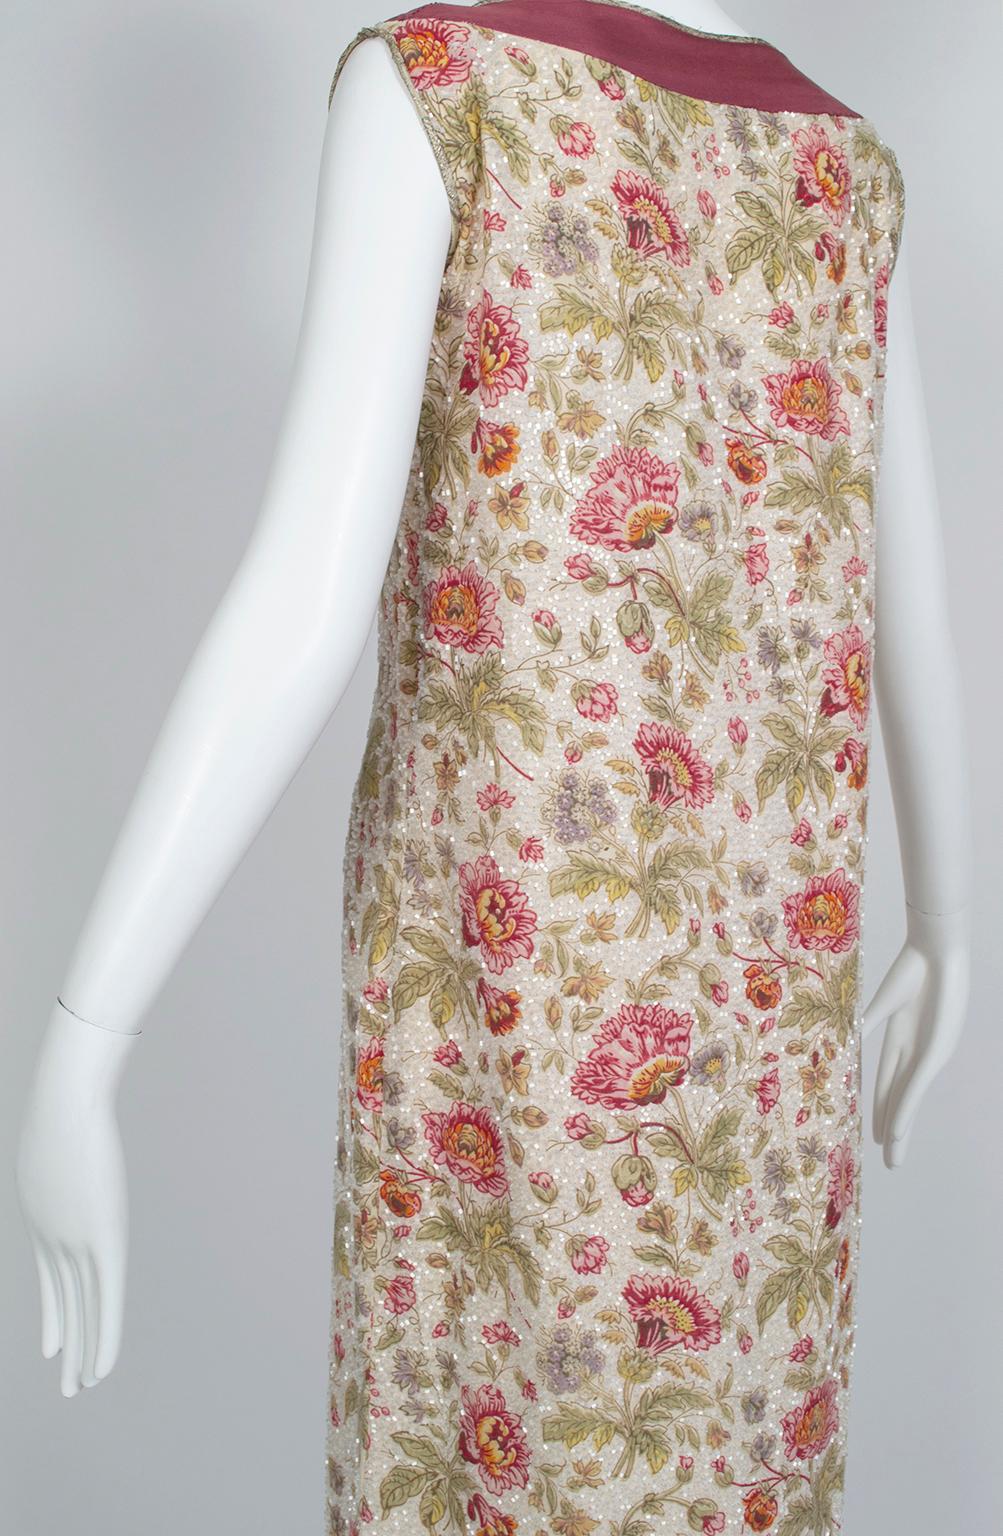 A rare larger size for a Jazz Age garment, this incredible dress offers the comfort of a shift with the elegance of formalwear thanks to its lustrous glass beads. We love how the flowers are left unbeaded for extra depth and texture. Areas where